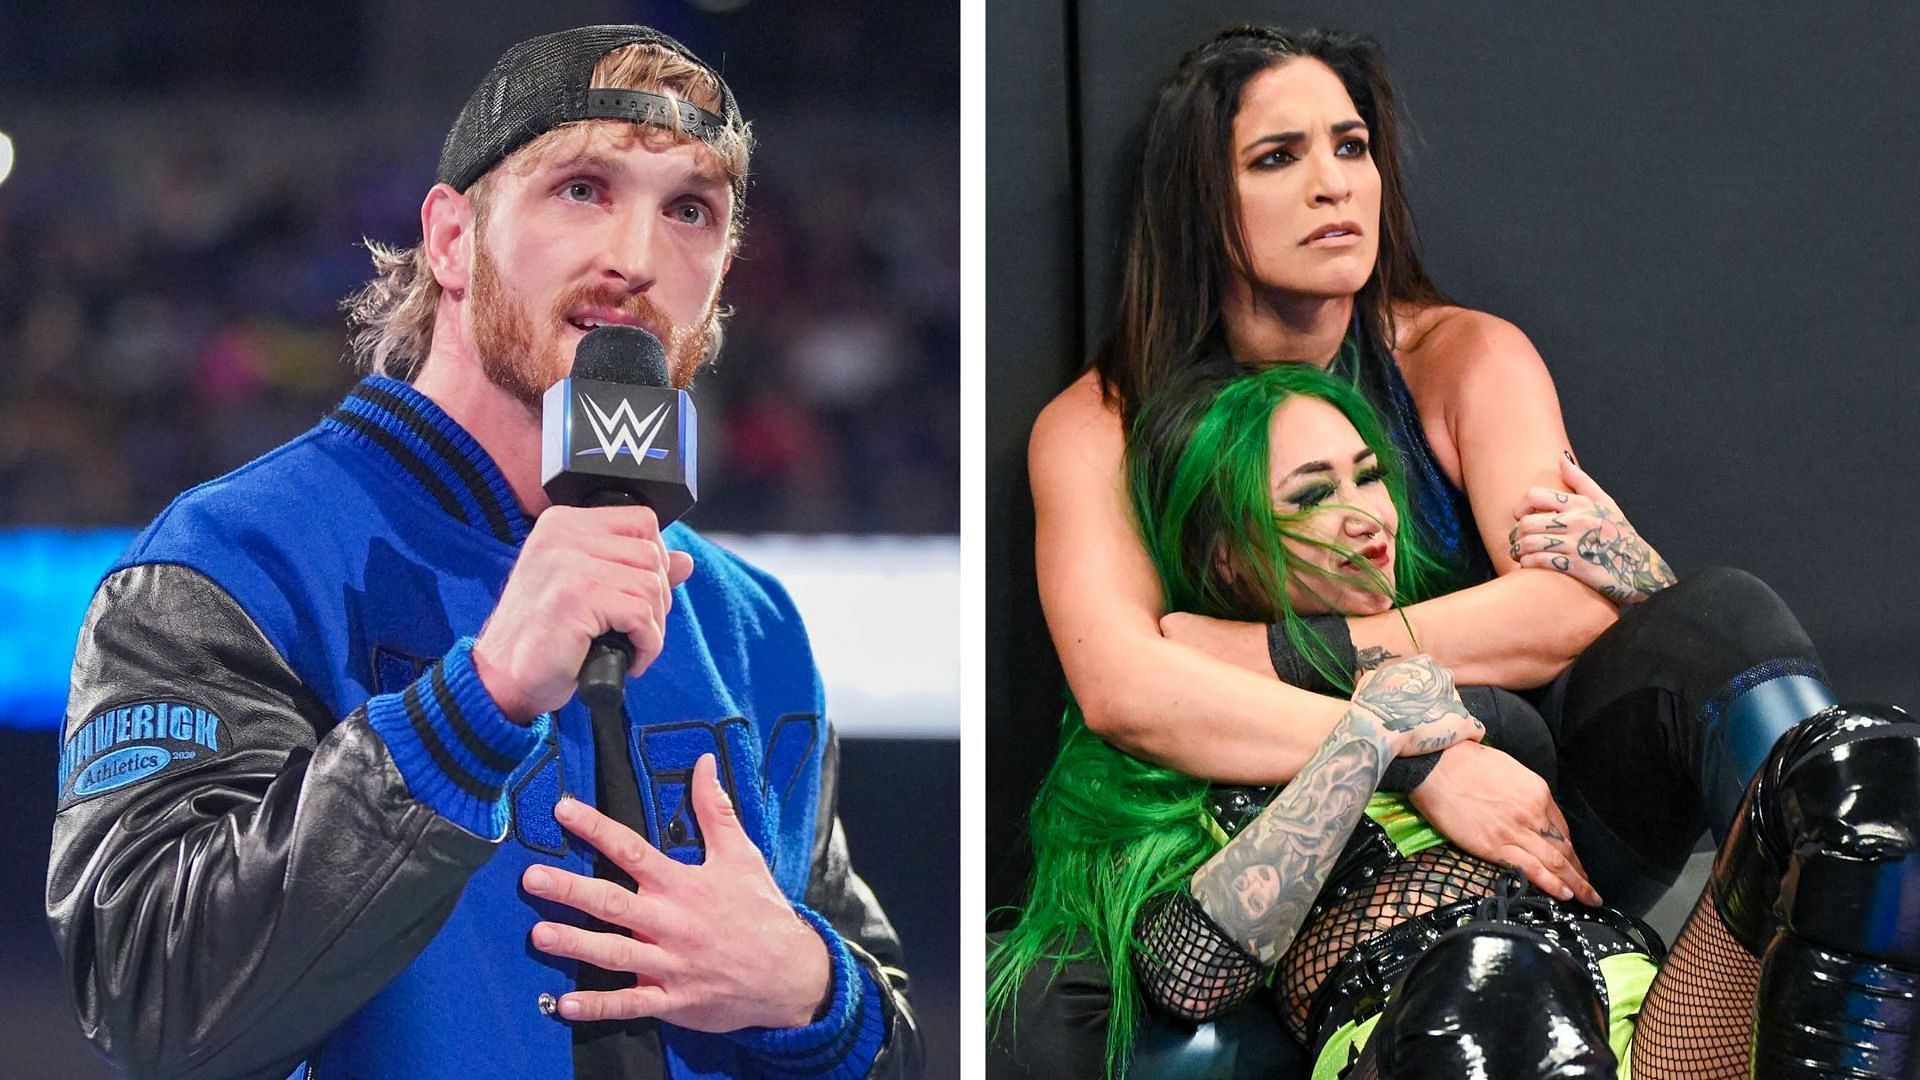 Seven new programs are coming to WWE Network and Peacock this weekend